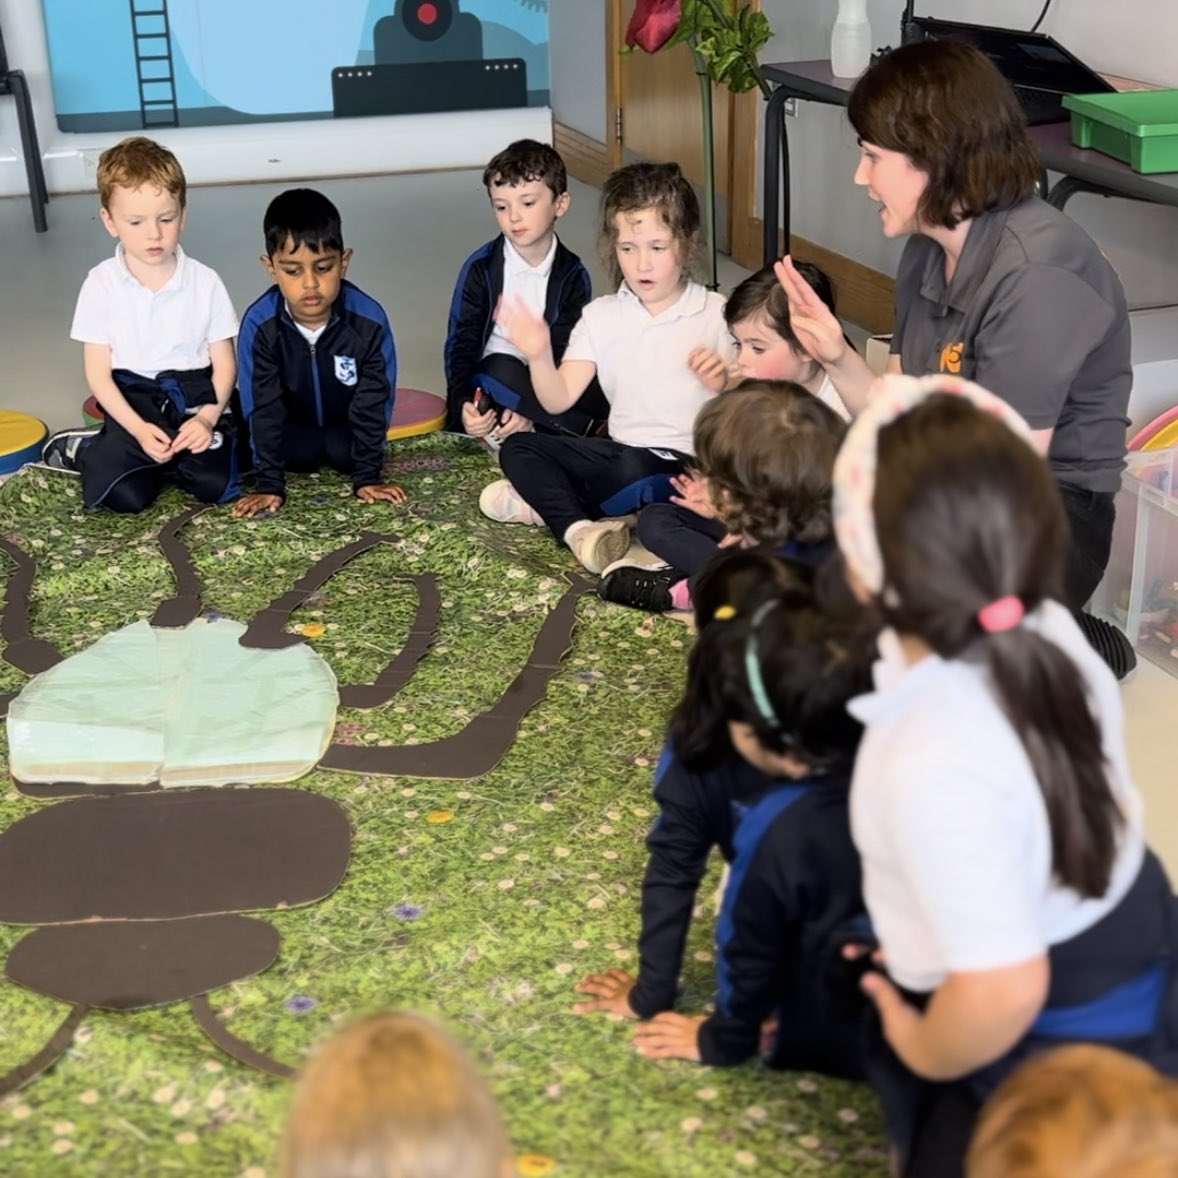 ❓ Did you know that some snails can live between 5-25 years?   Today, pupils from St. Joseph’s Primary School met our resident Giant African Land Snails in W5’s interactive workshop ‘In Our Nature’. 🐌 🔗 Find out MORE: bit.ly/Workshops-W5